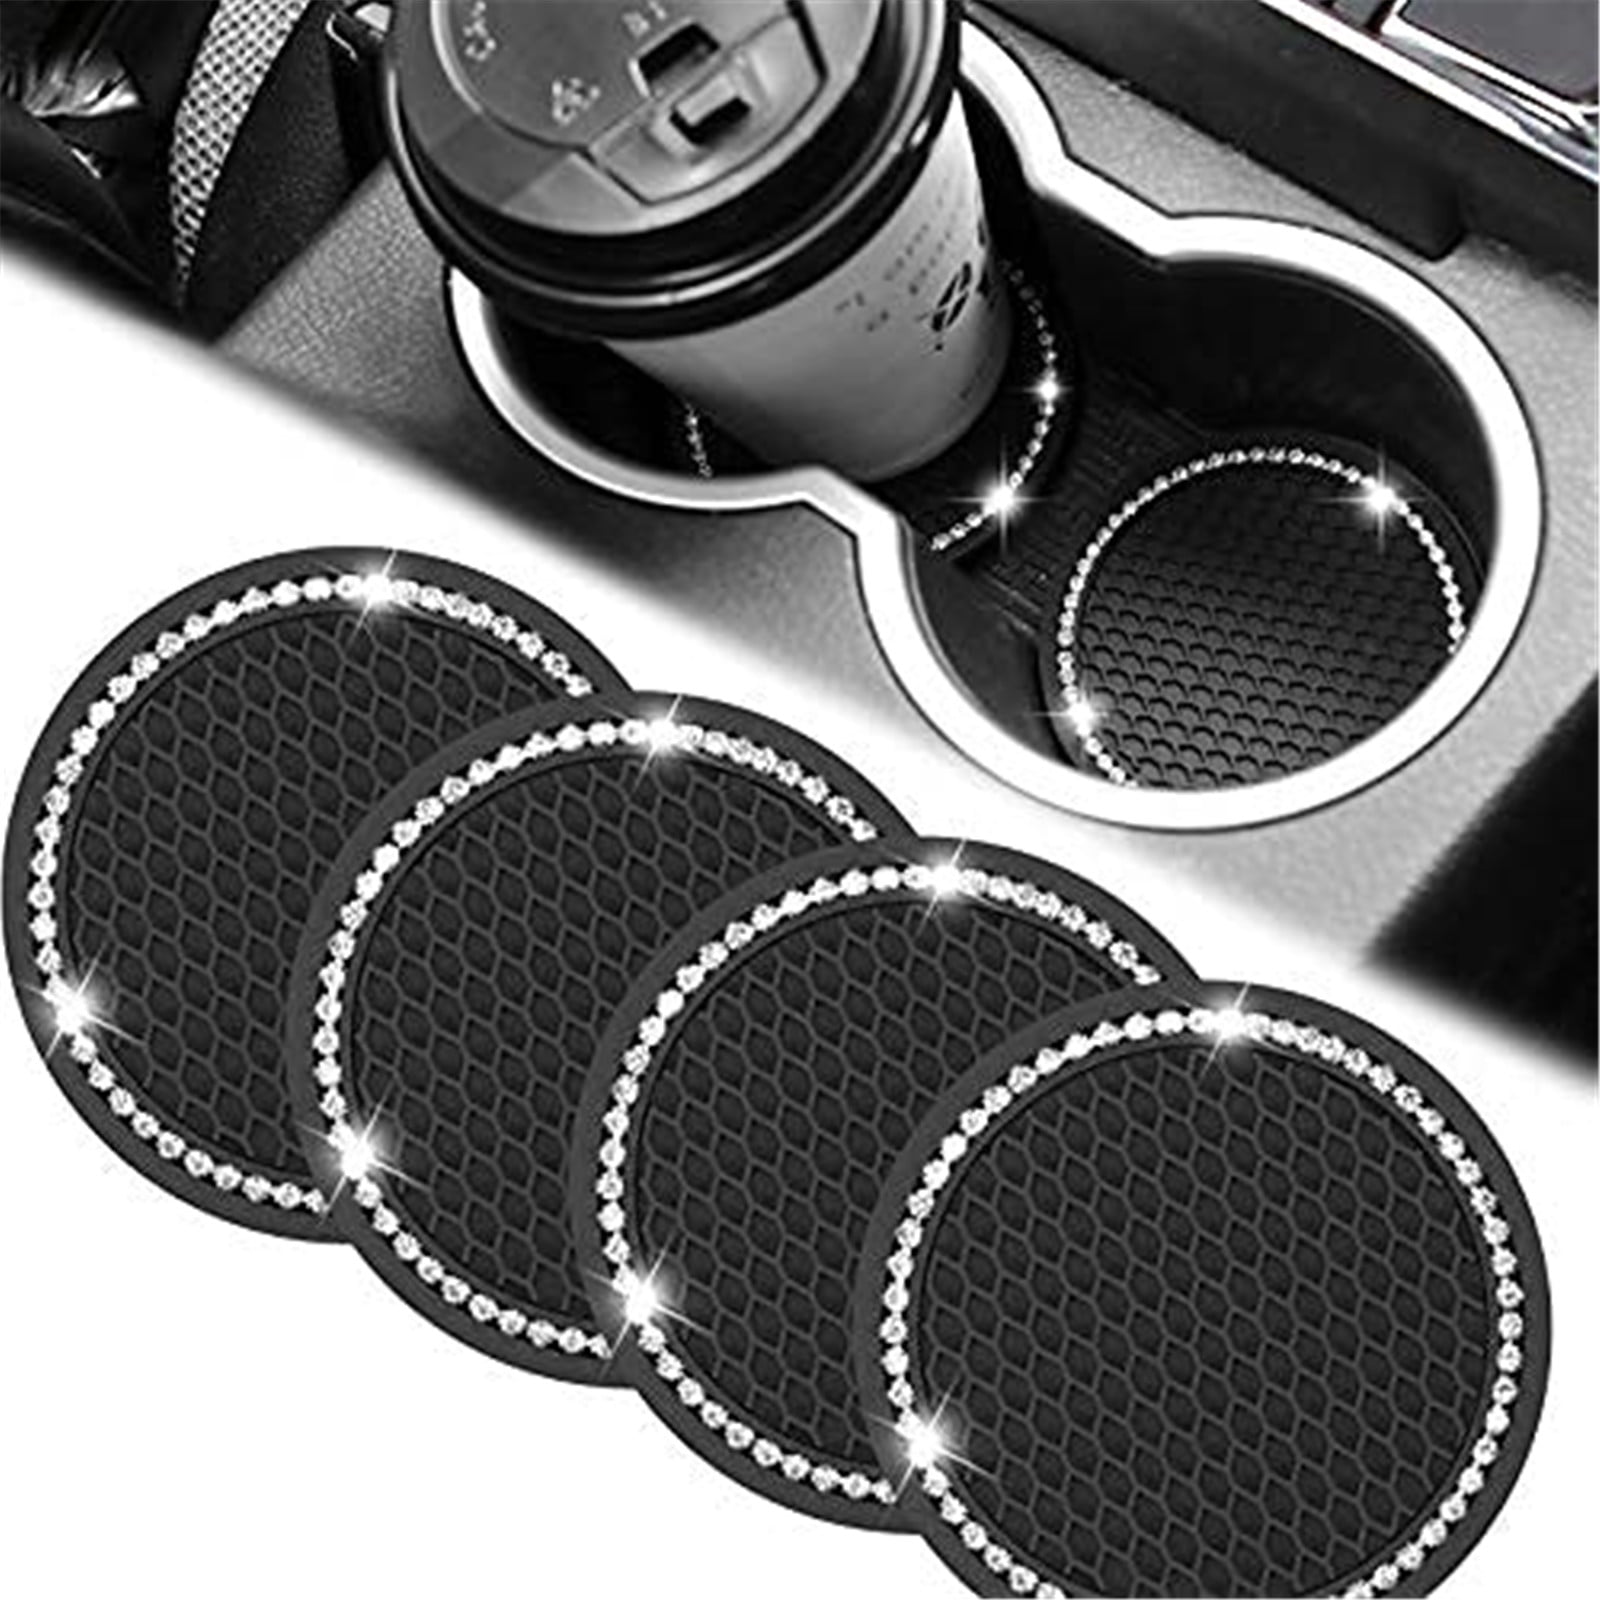 Blue 4PCS Shiny Universal PVC Non-Slip Vehicle Interior Crystal Coaster Suitable for Most Cars CMOISO Car Coasters Glitter Car Cup Holder Insert 